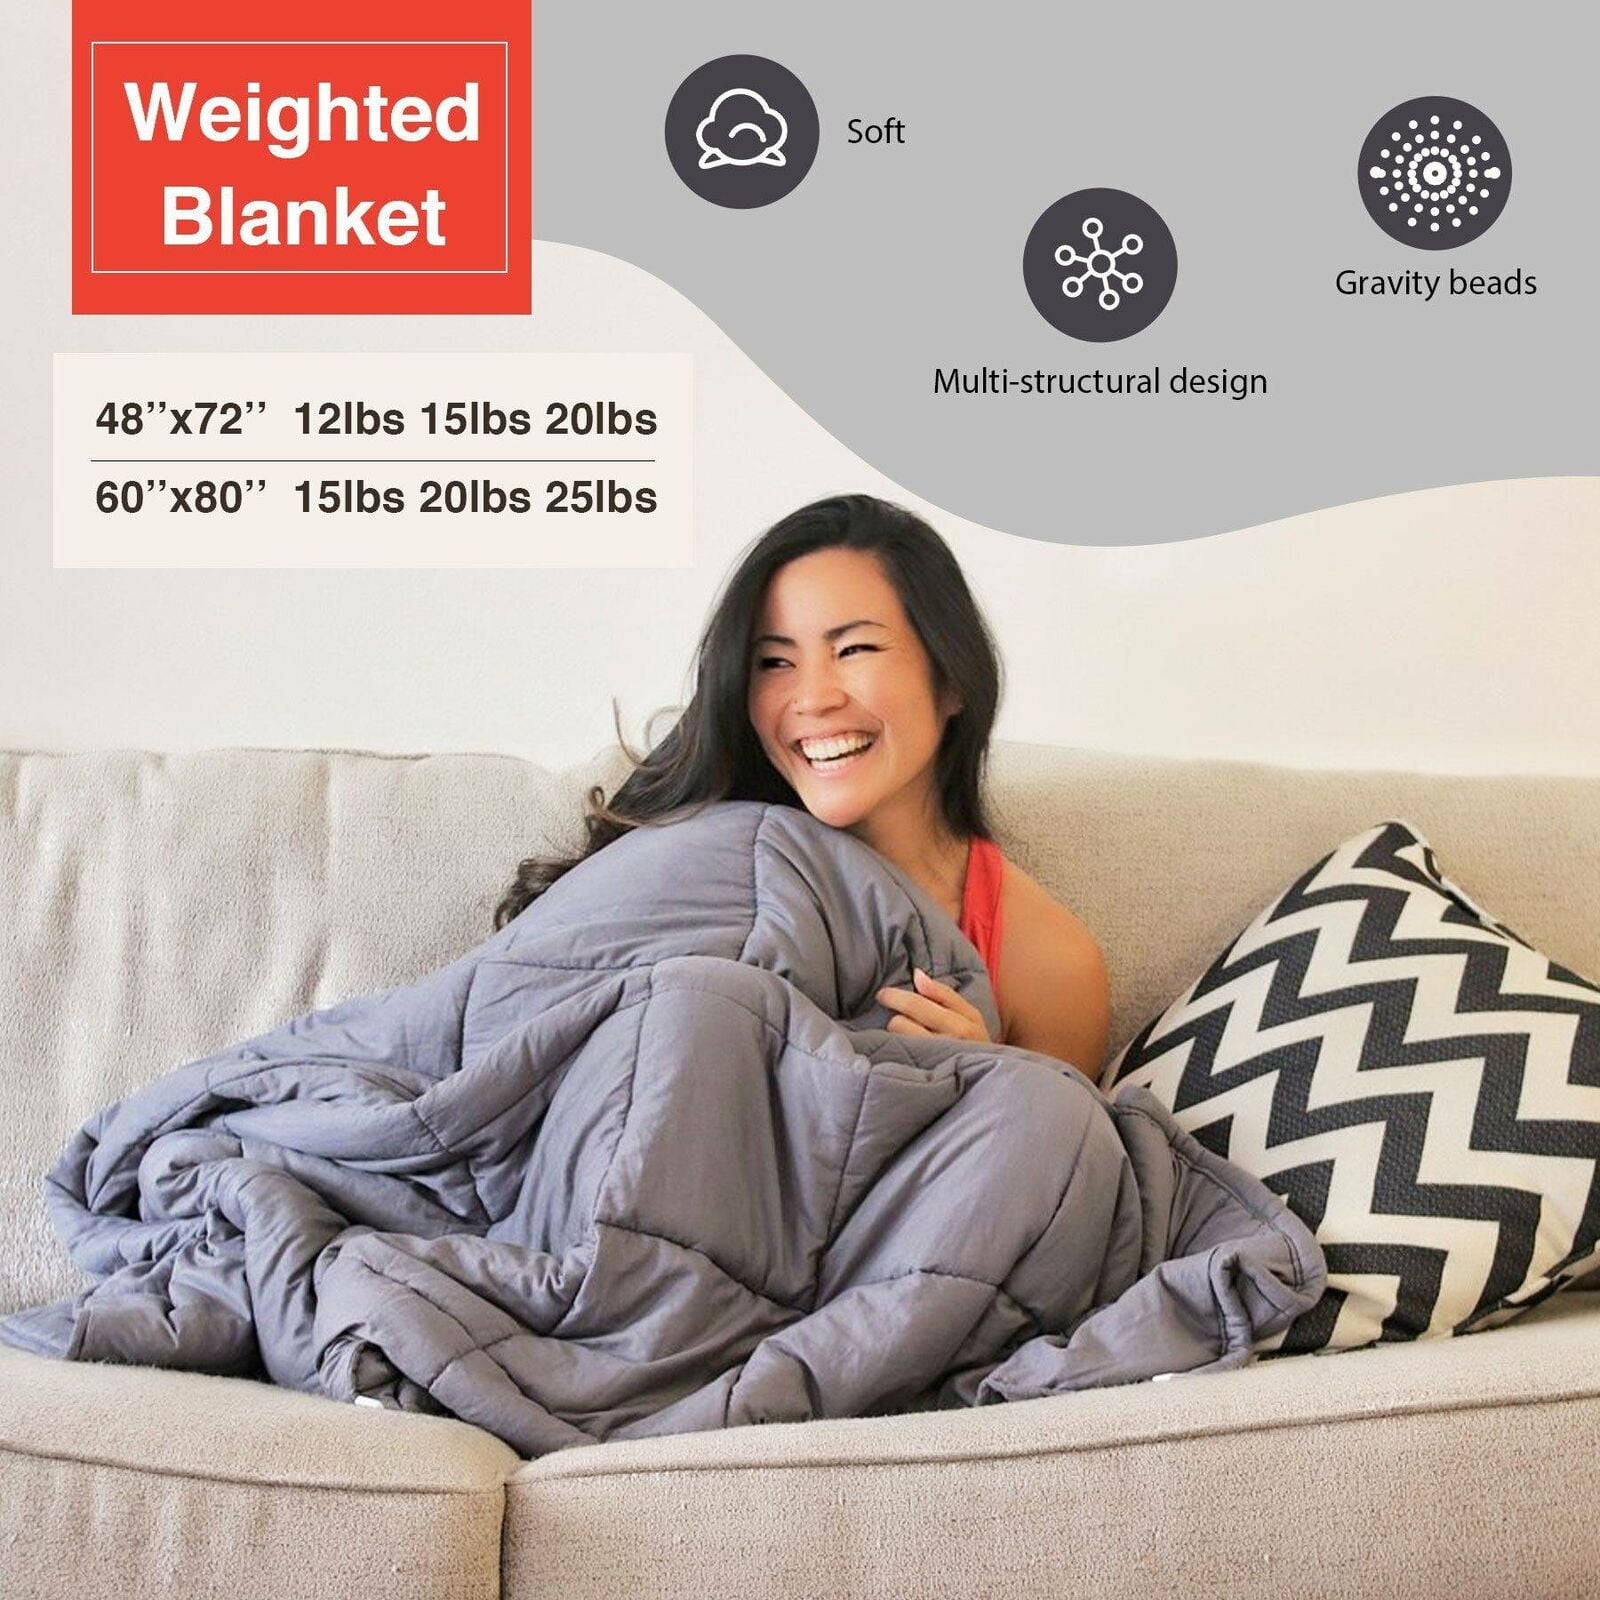 Details about   Weighted Blanket Full Queen Reduce Stress Promote Deep Sleep Bedding Blankets @ 